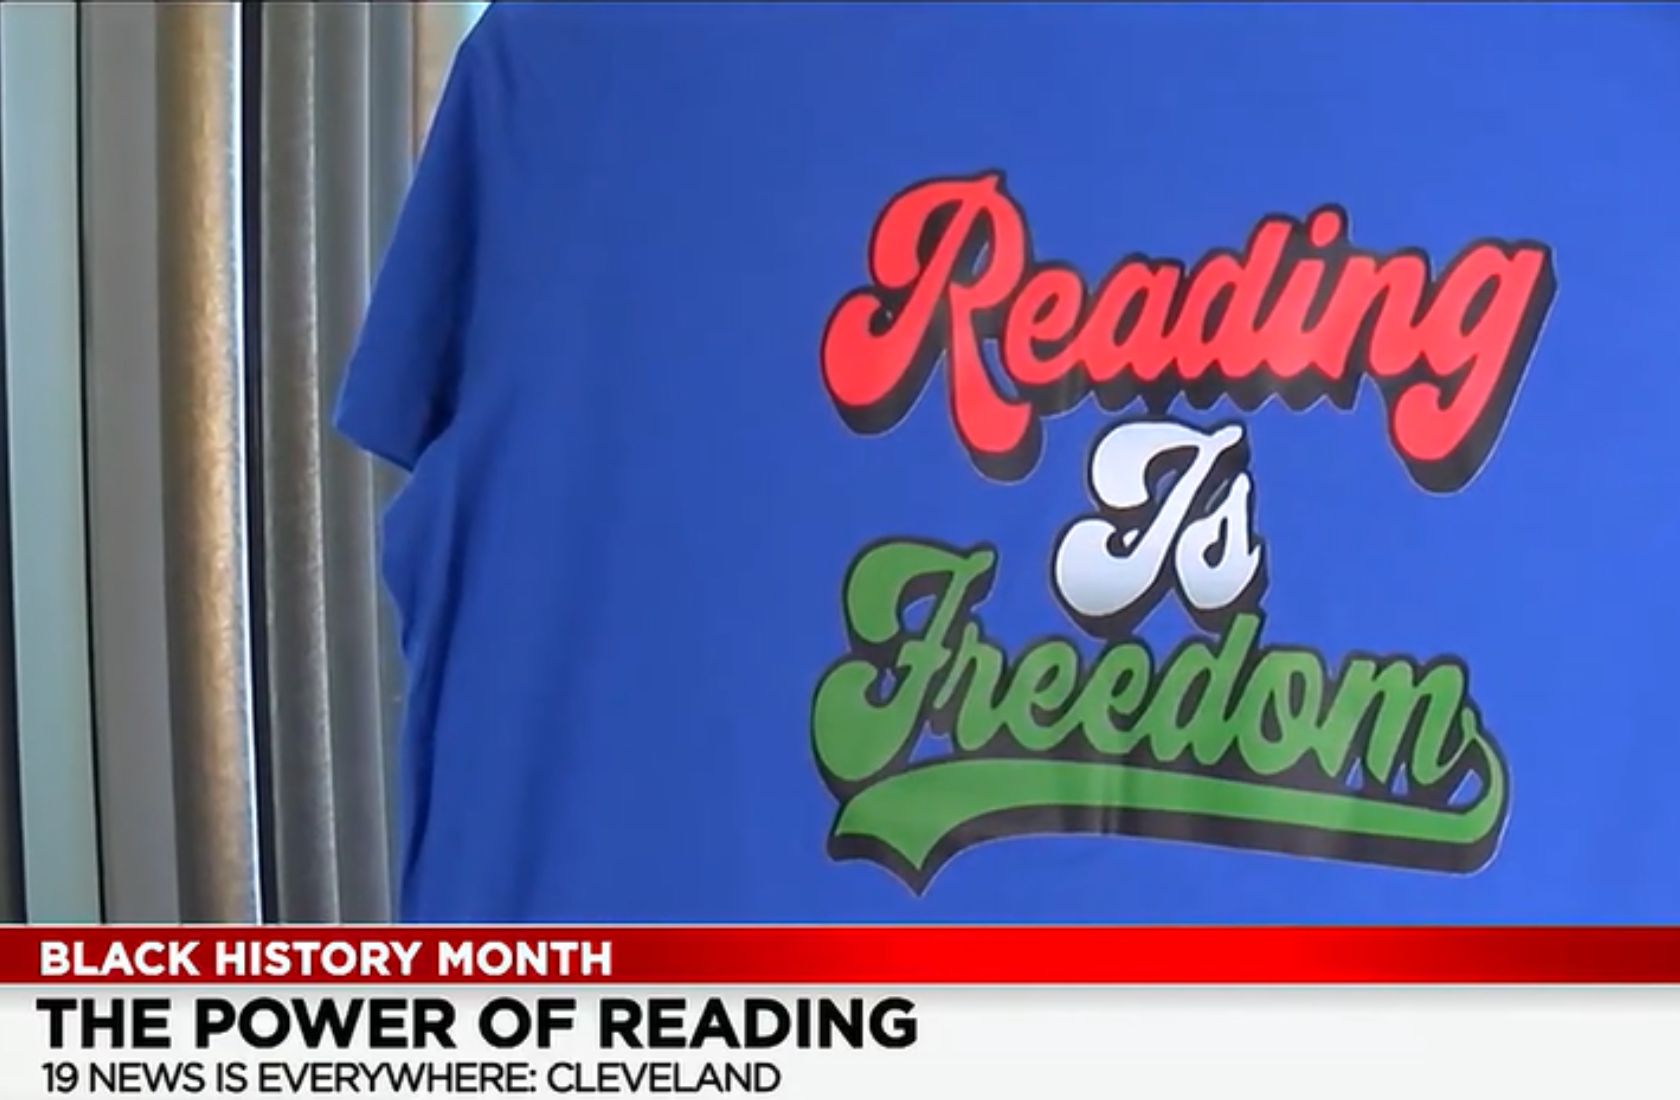 East Cleveland woman giving thousands of books away inspiring kids to read